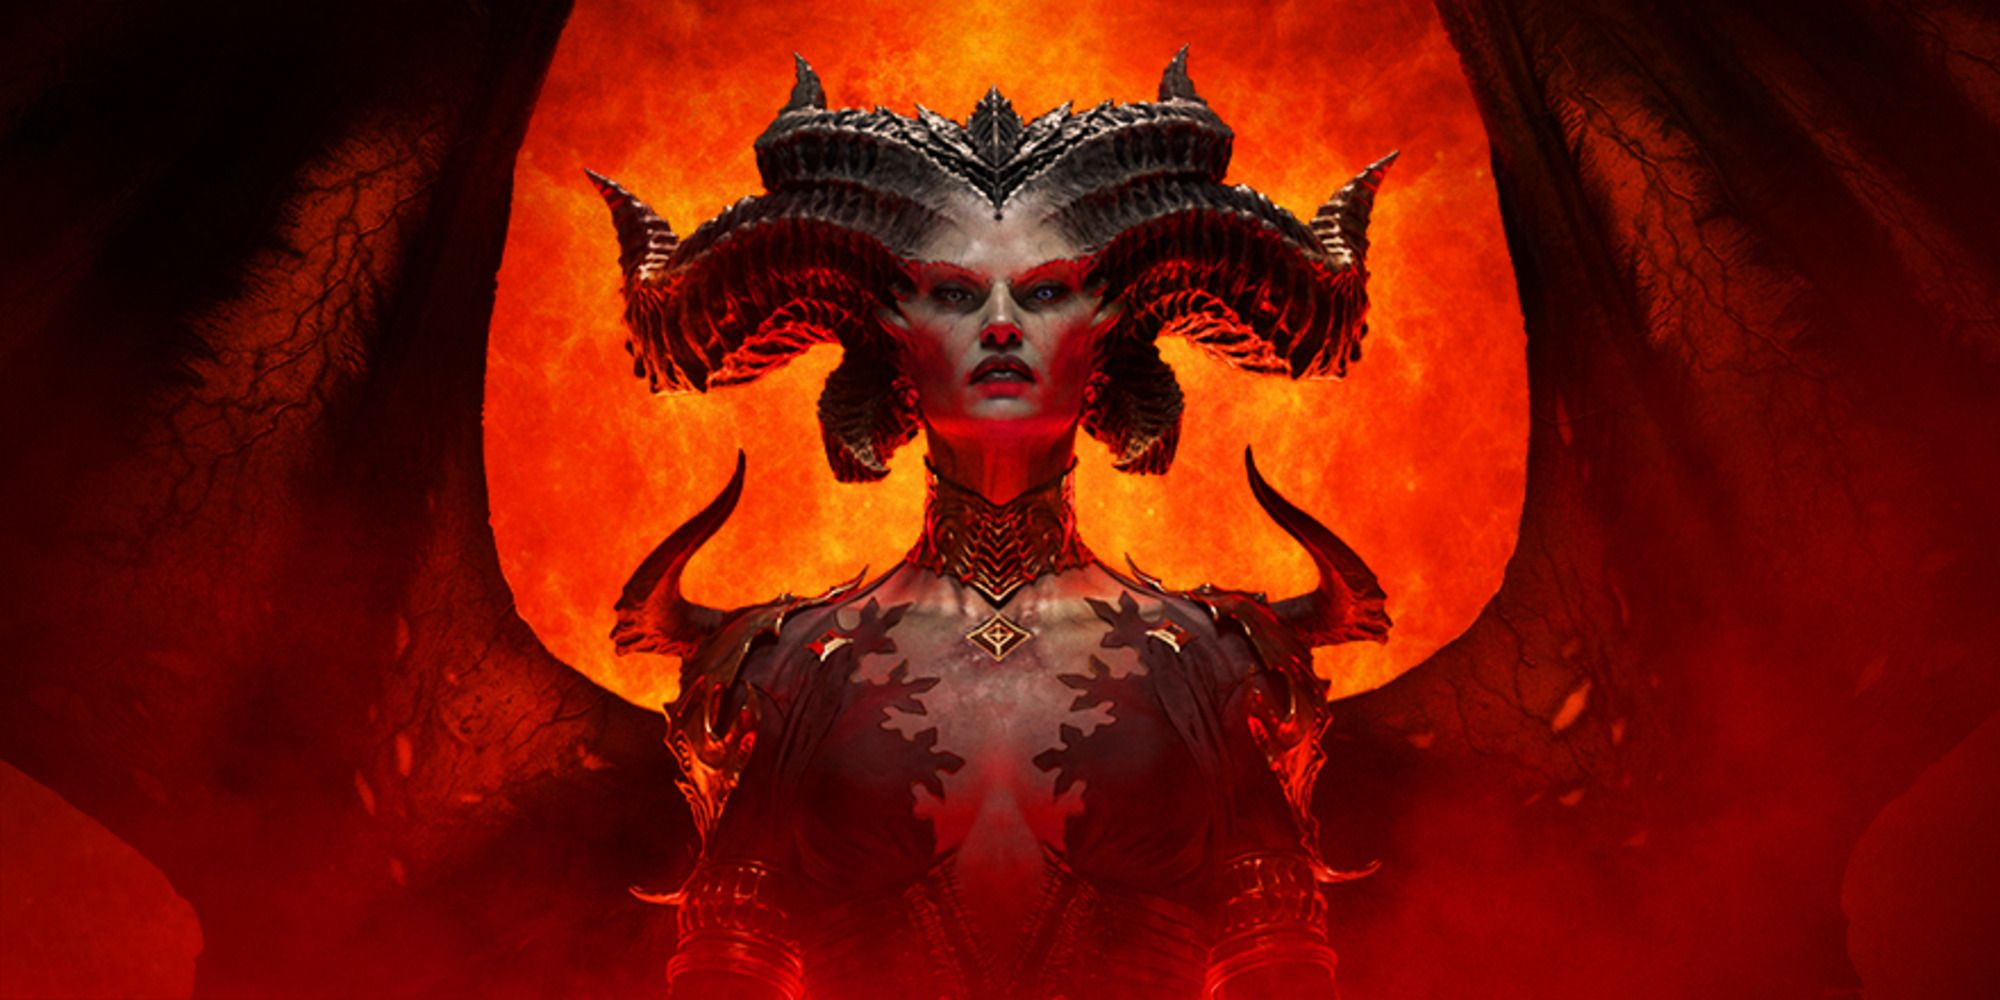 Lilith from Diablo 4 as appearing on the cover art for the game.